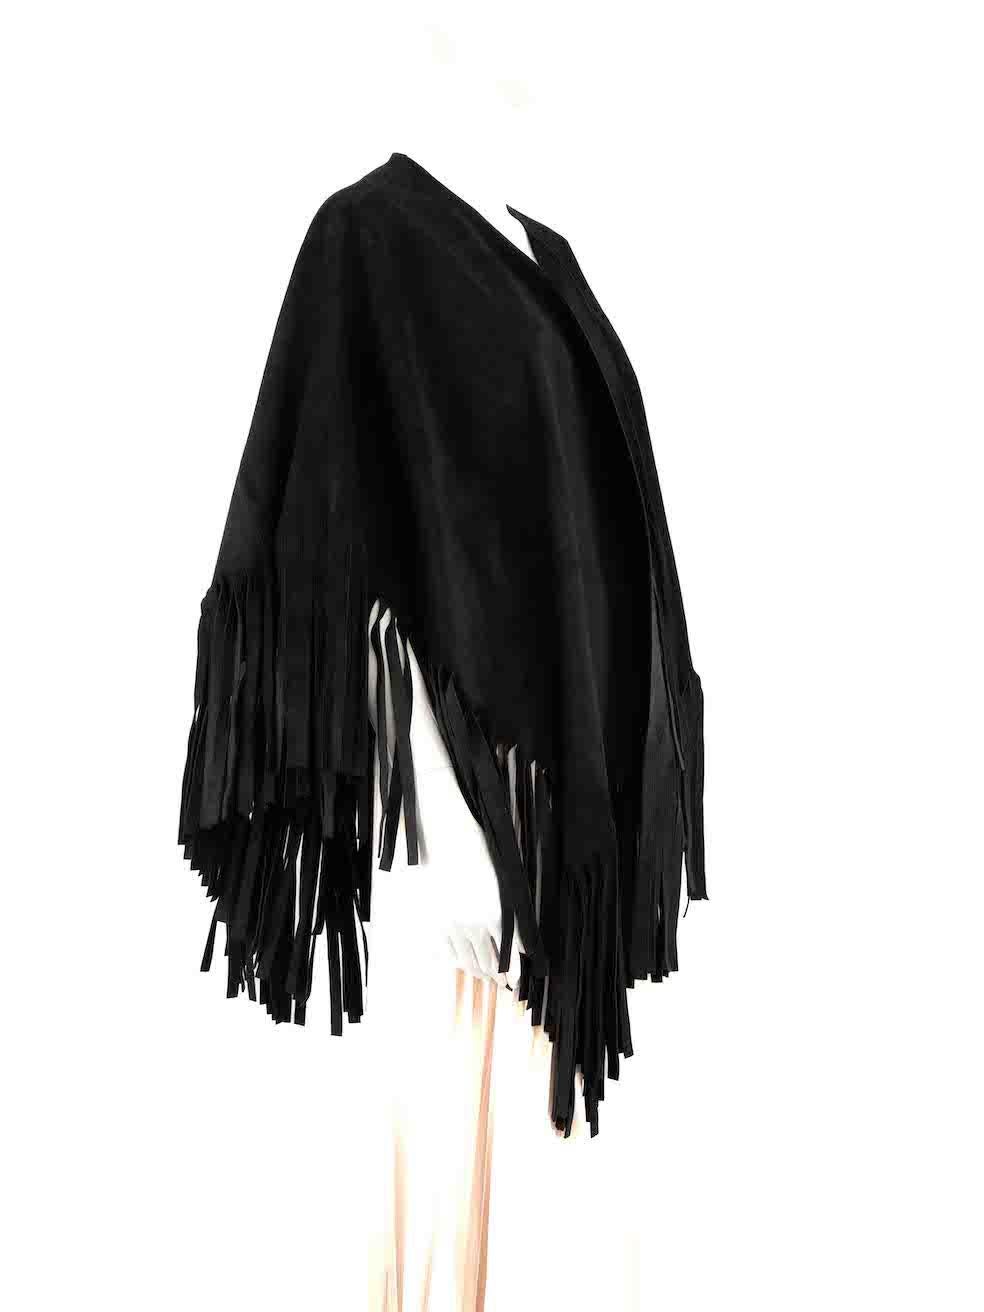 CONDITION is Very good. Minimal wear to cape is evident. Minimal wear to the rear neckline with light marks to the suede on this used Burberry Prorsum designer resale item.
 
 
 
 Details
 
 
 Black
 
 Suede
 
 Poncho
 
 Fringed hem
 
 
 
 
 
 Made